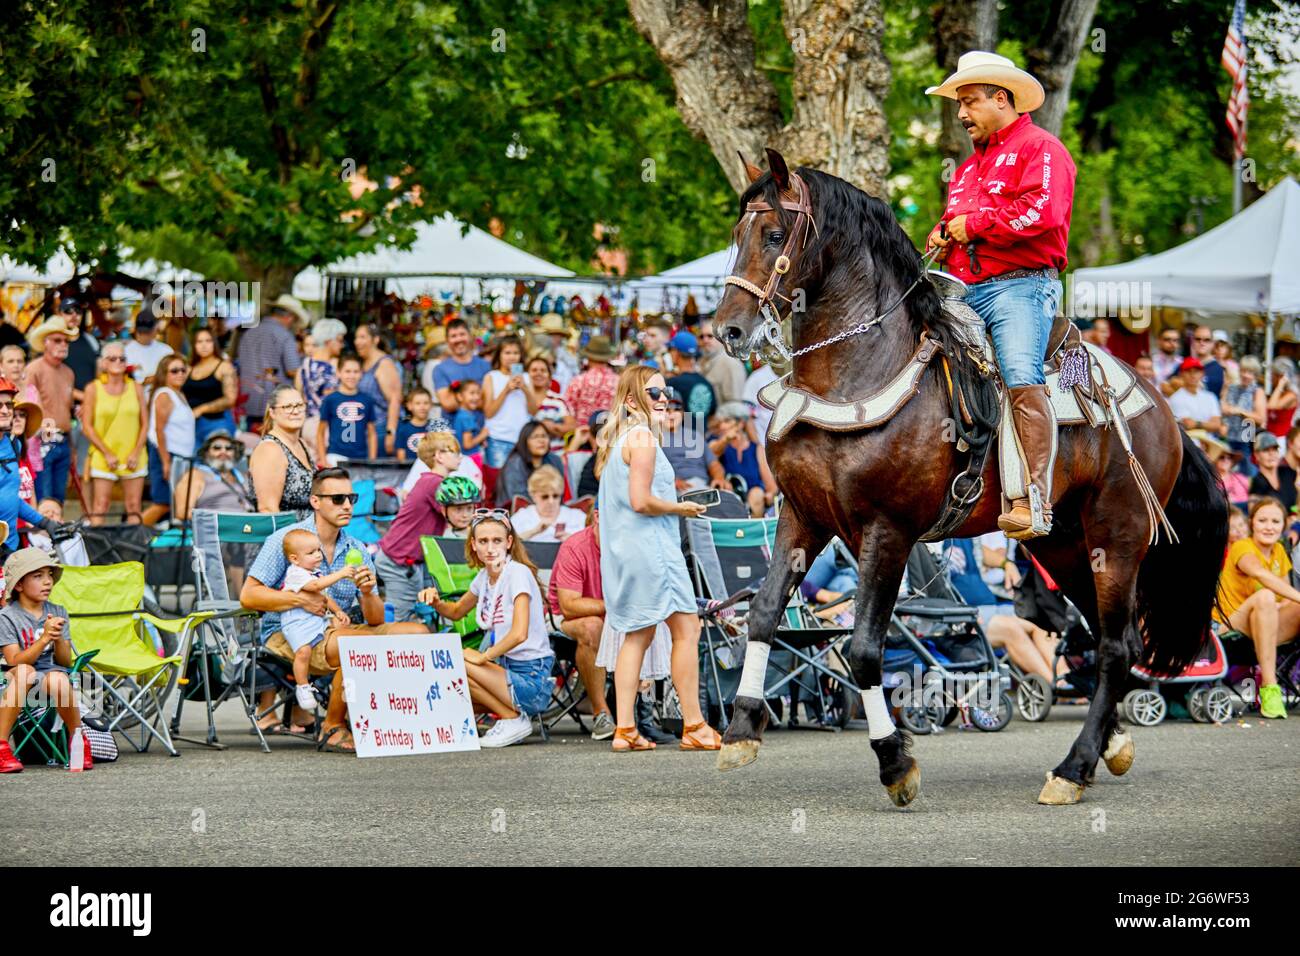 Prescott, Arizona, USA - July 3, 2021: Equestrian rider performing with his horse in the 4th of July parade Stock Photo